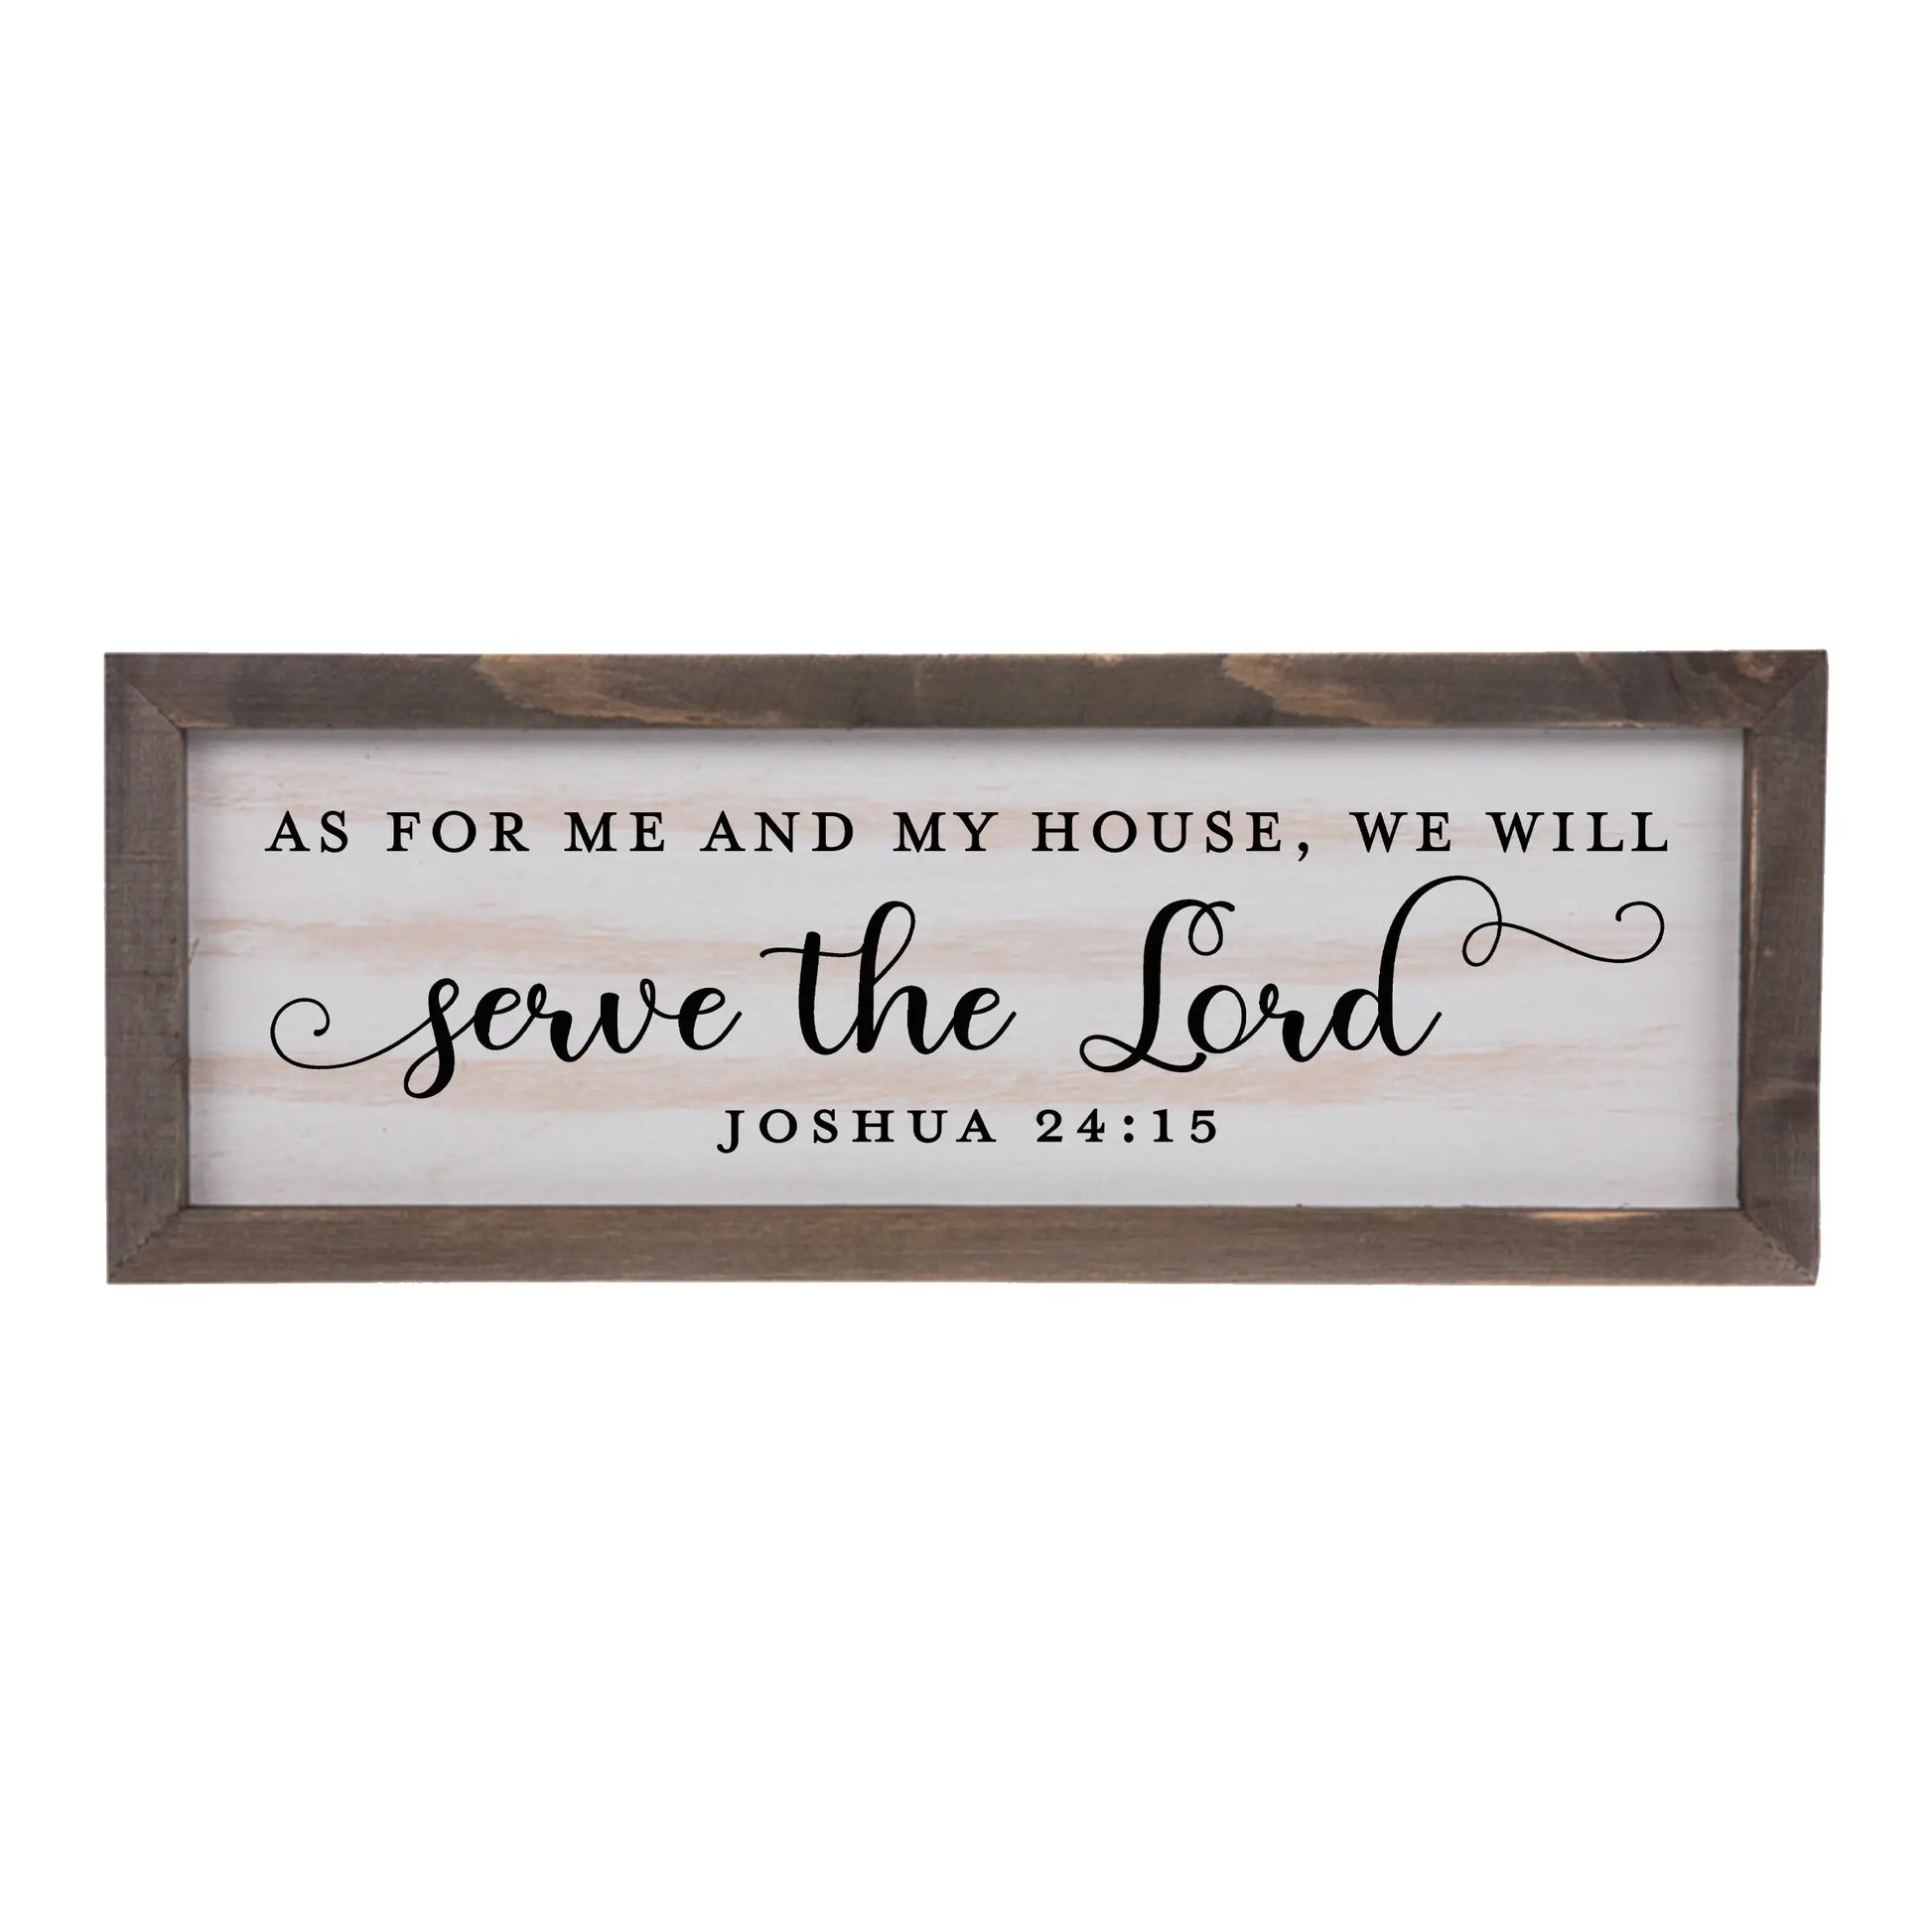 As for Me and My House We Will Serve the Lord Rustic Whitewash Wood Frame Scripture Sign | 5.5" x 15" Small Farmhouse Decor amazingfaithdesigns